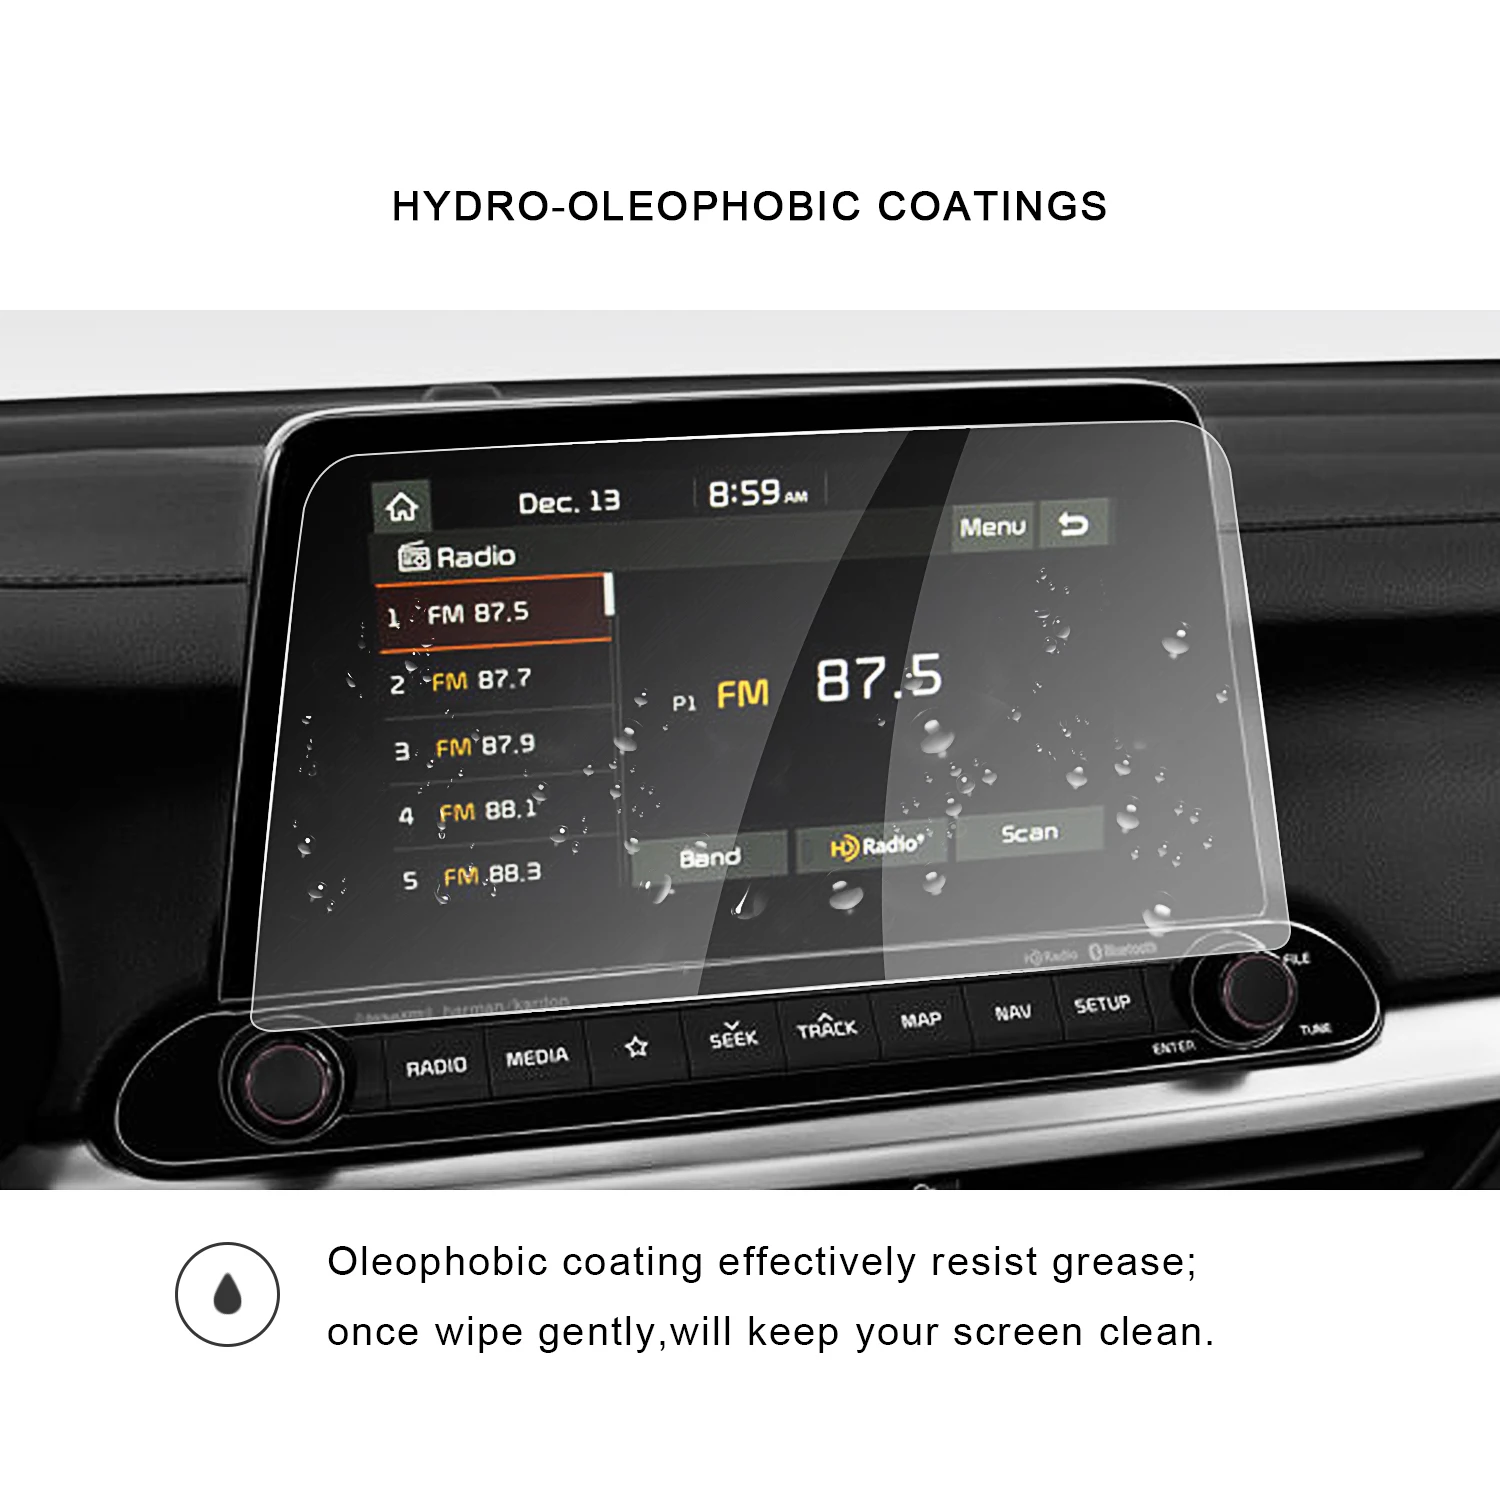 ruiya for fortestinger 2019 8 inch car navigation touch display screen protector auto interior accessories tempered glass film free global shipping